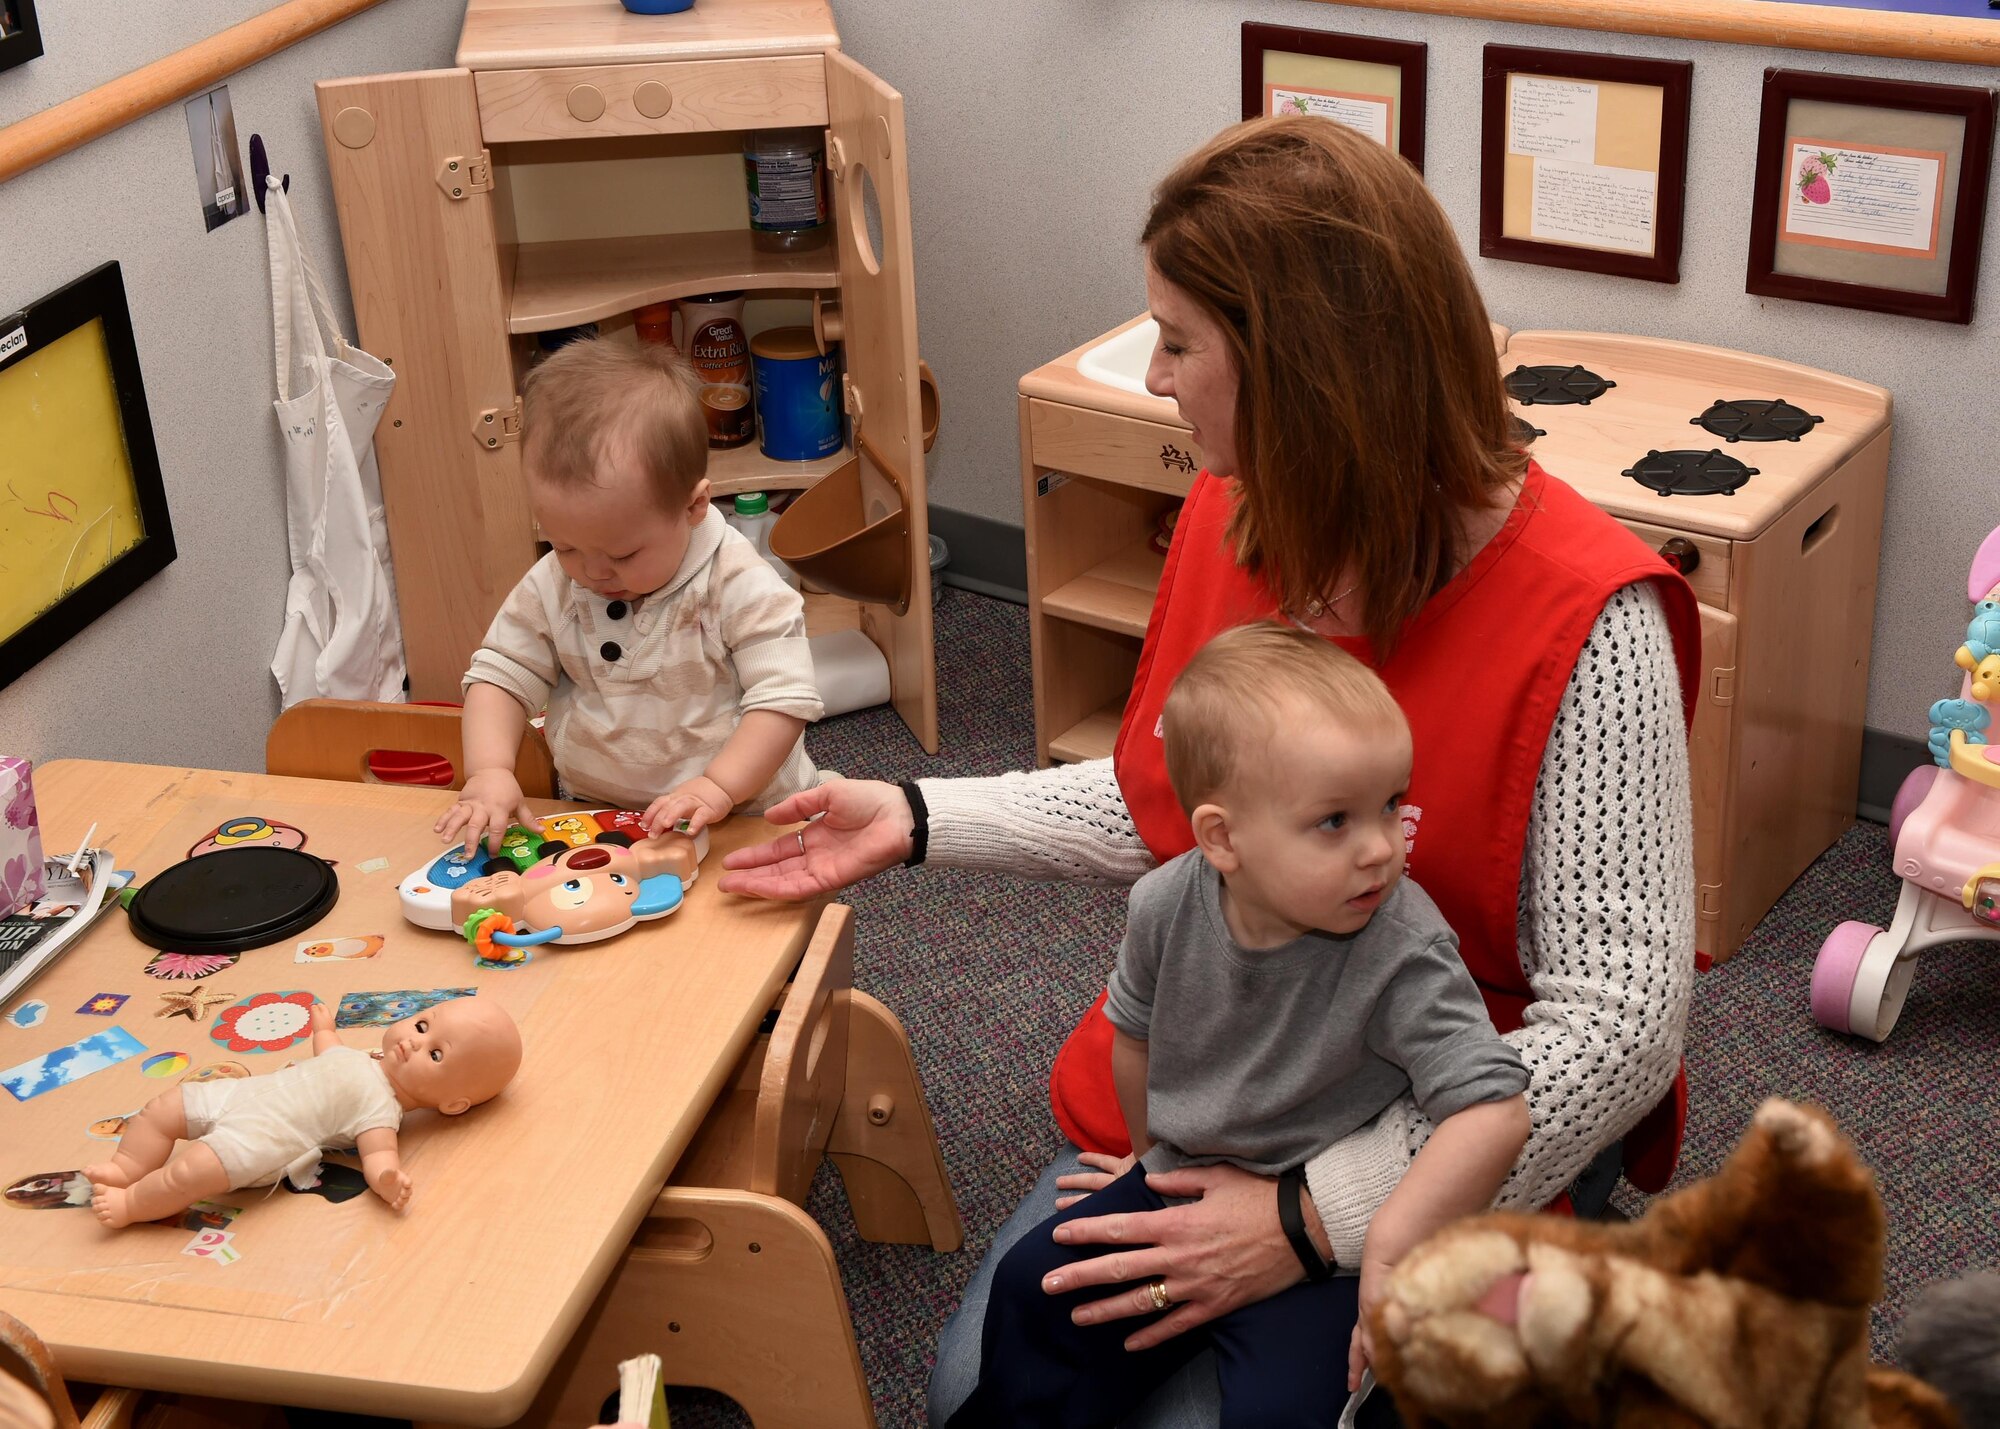 Bev Roberts, 97th Force Support Squadron Child Development Program Technician, interacts with children in a housekeeping area at the Child Development Center, January 4, 2017. The CDC provides a safe and healthy learning environment so that Department of Defense civilian and military personnel can focus on the mission knowing their children are well taken care of during the duty day.